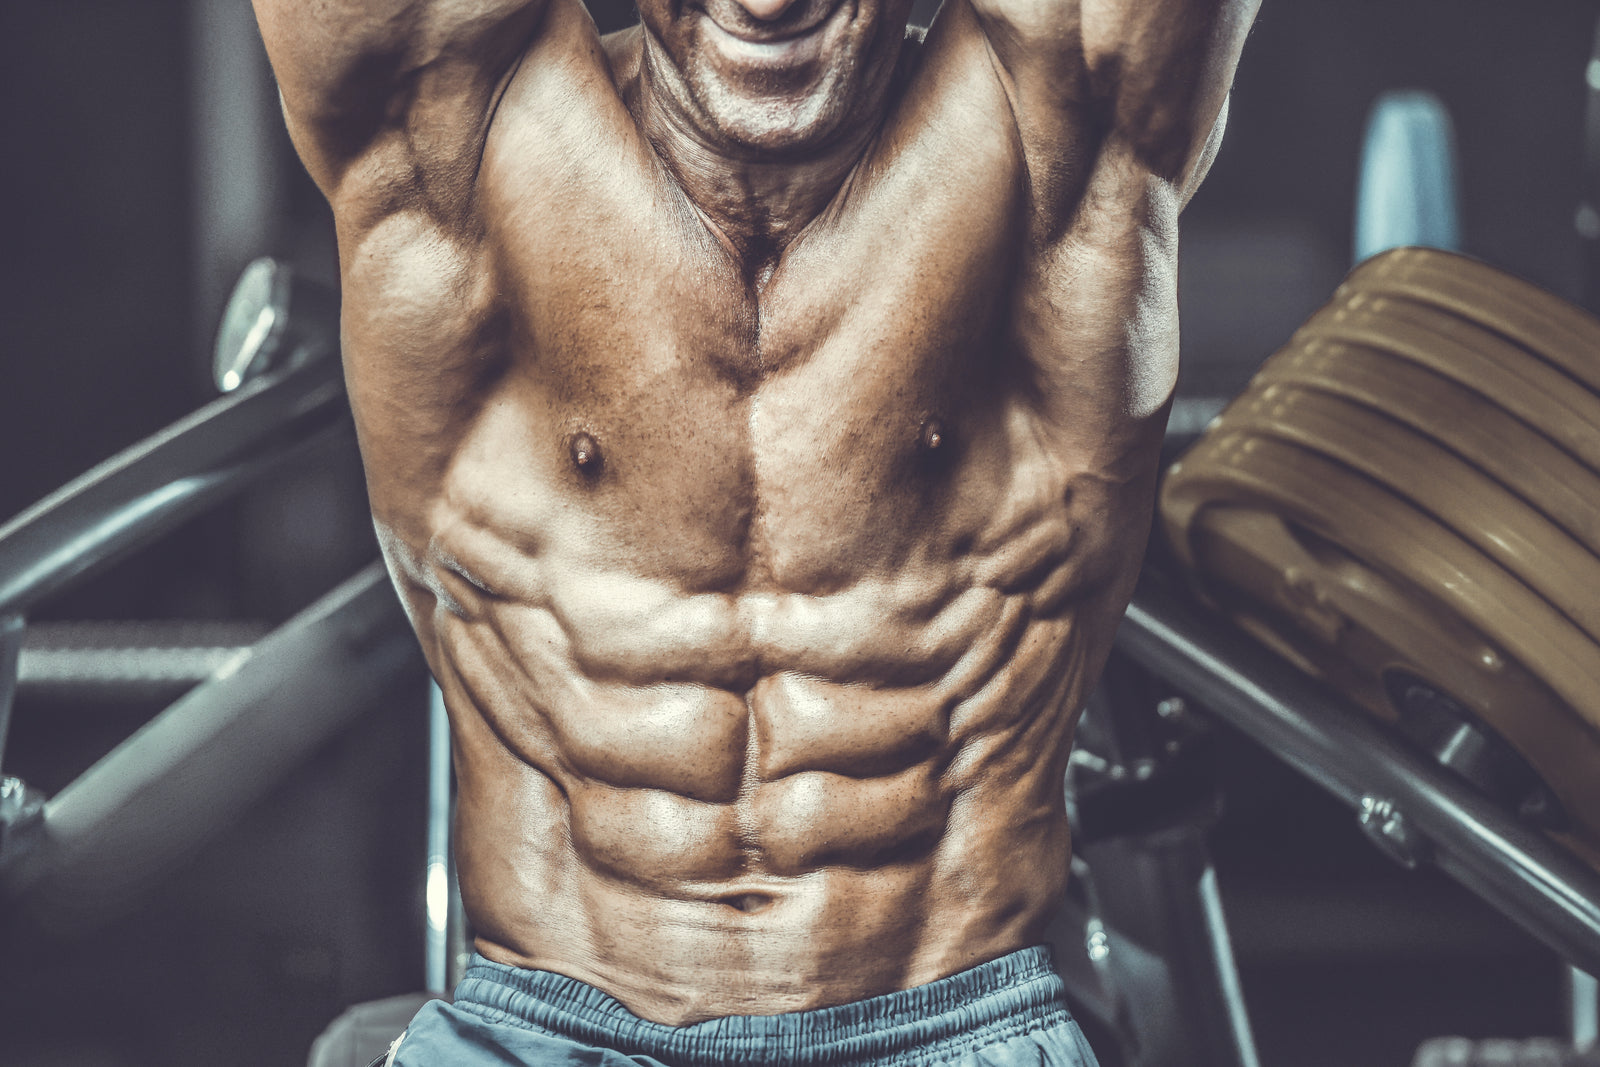 7 Things Guys With Six-packs Do Every Day—There's More to it Than